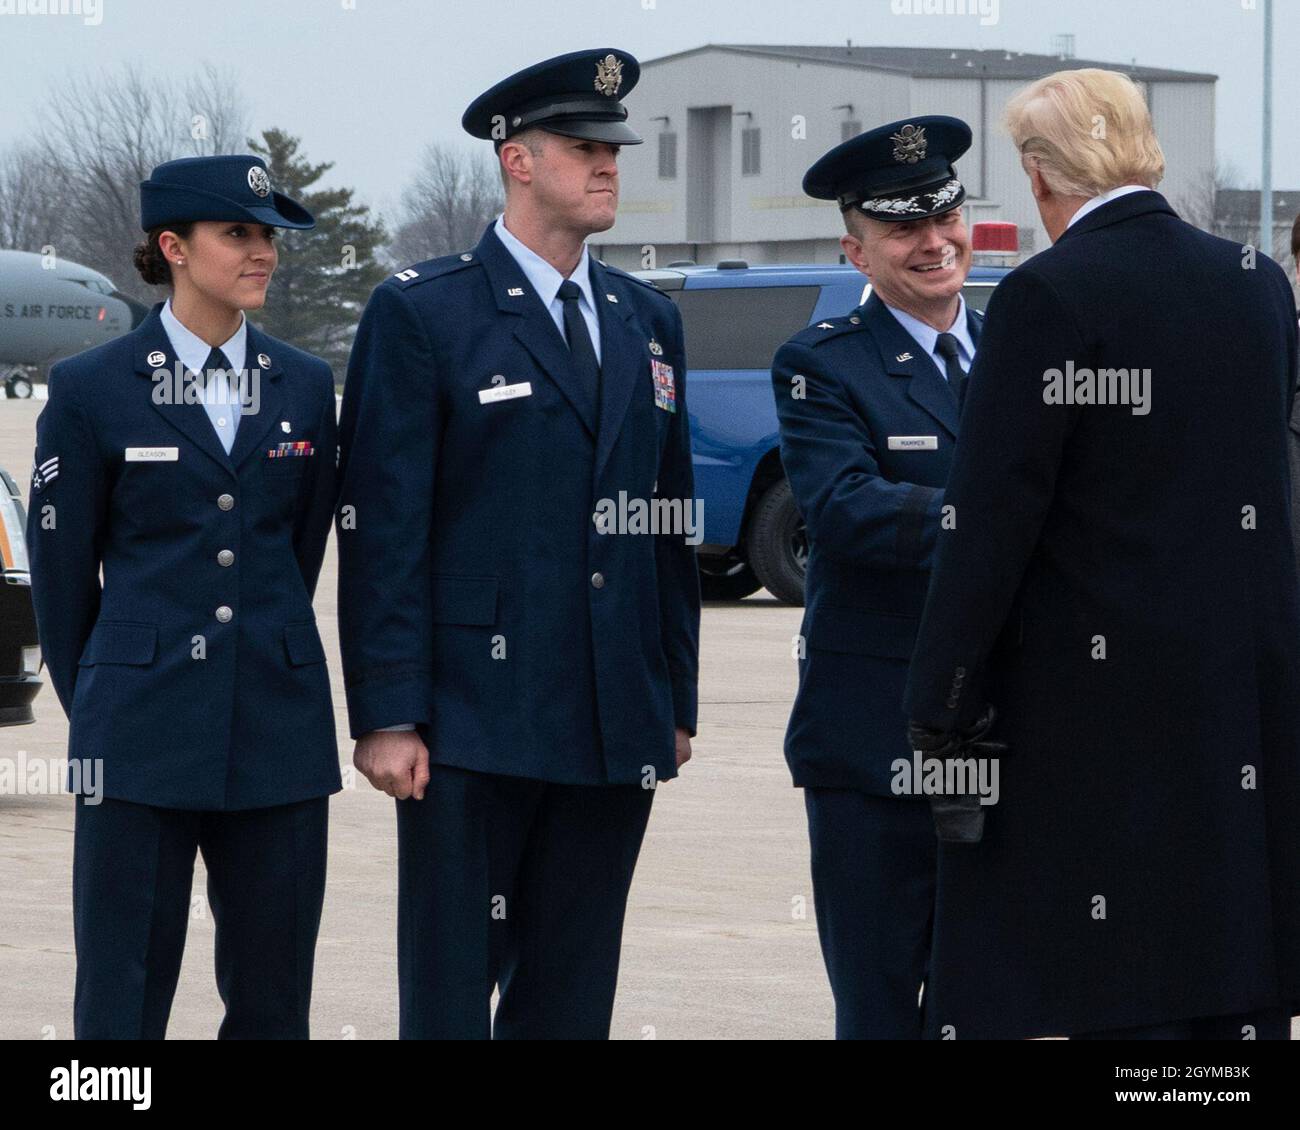 SELFRIDGE AIR NATIONAL GUARD BASE, Mich. -  (Left to right) 127th Wing Airman of the Year Airman 1st Class Jenna Gleason, Executive Officer Capt. Chris Manley, and Brig. Gen. Rolf E. Mammen, commander of the 127th Wing welcome President Donald Trump to Selfridge Air National Guard Base, Mich. Jan 30, 2020.  The President spoke briefly with the Selfridge Airmen before traveling to a nearby auto parts supplier in Warren, Mich.  Selfridge is home to many DoD units including the Air National Guard, Army, Navy, Marine Corps, Coast Guard, Customs and Border Protection and Border Patrol.  (U.S. Air N Stock Photo